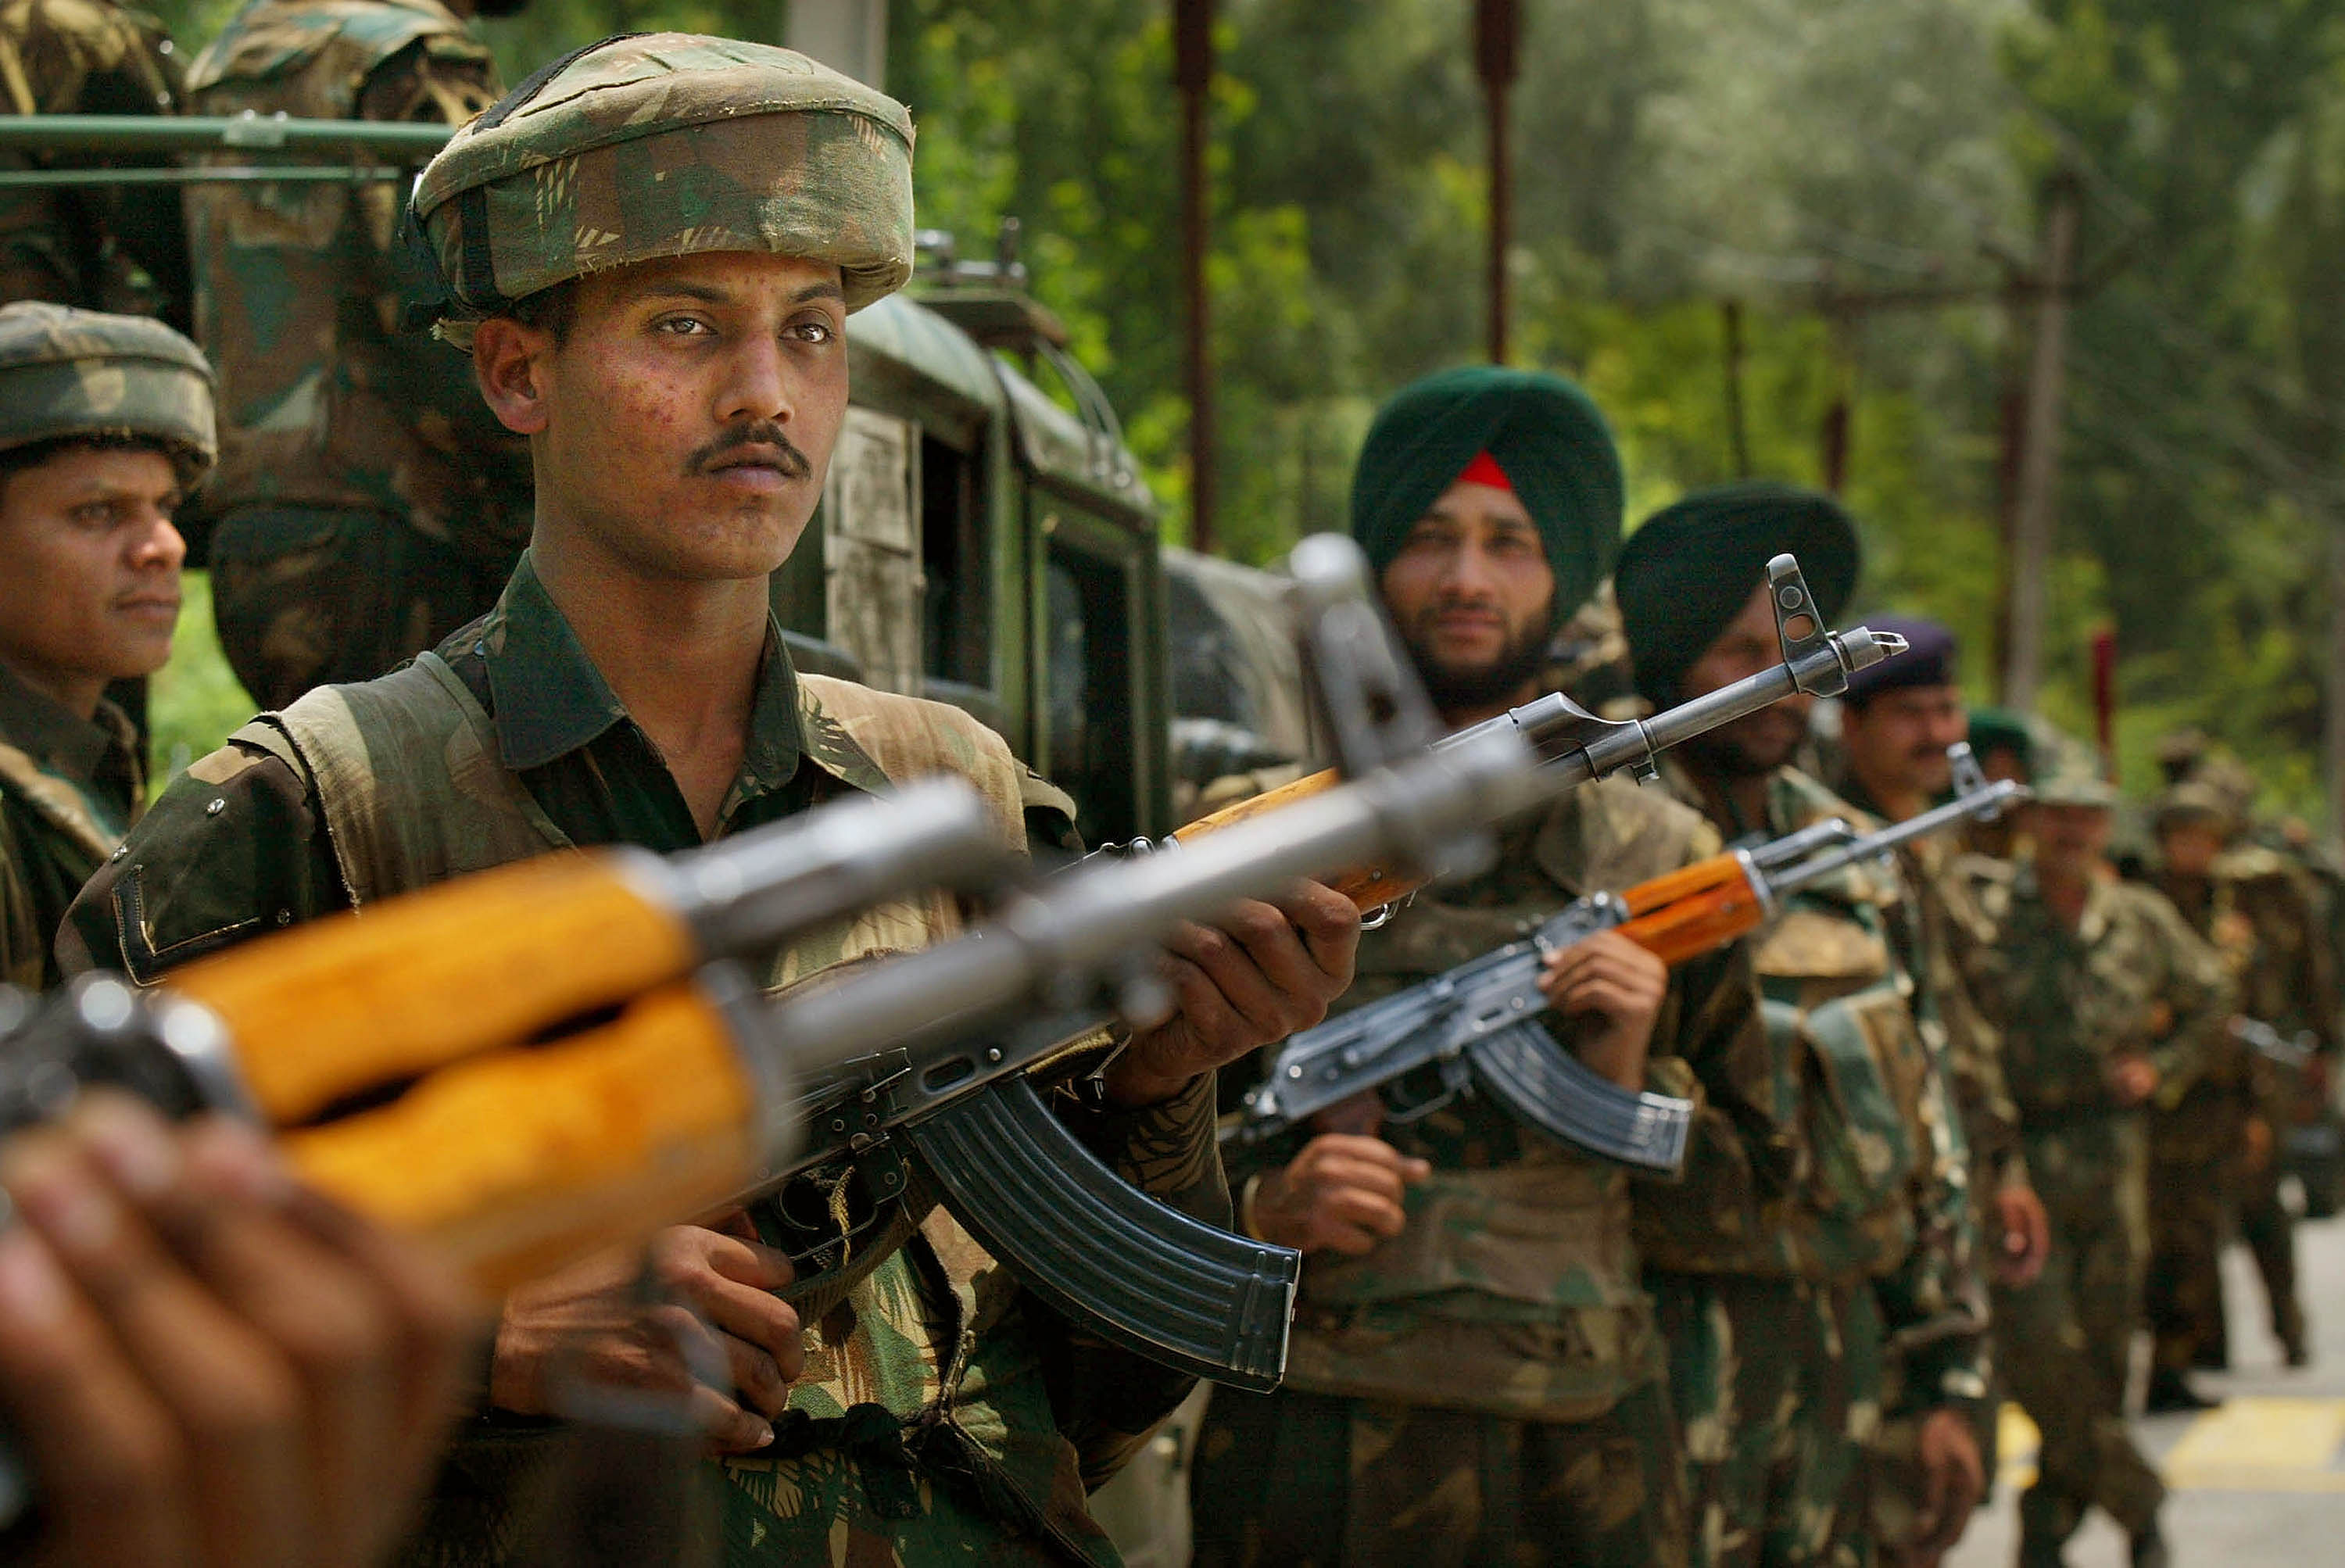 Indian Army is worried now that men can legally have sex with other